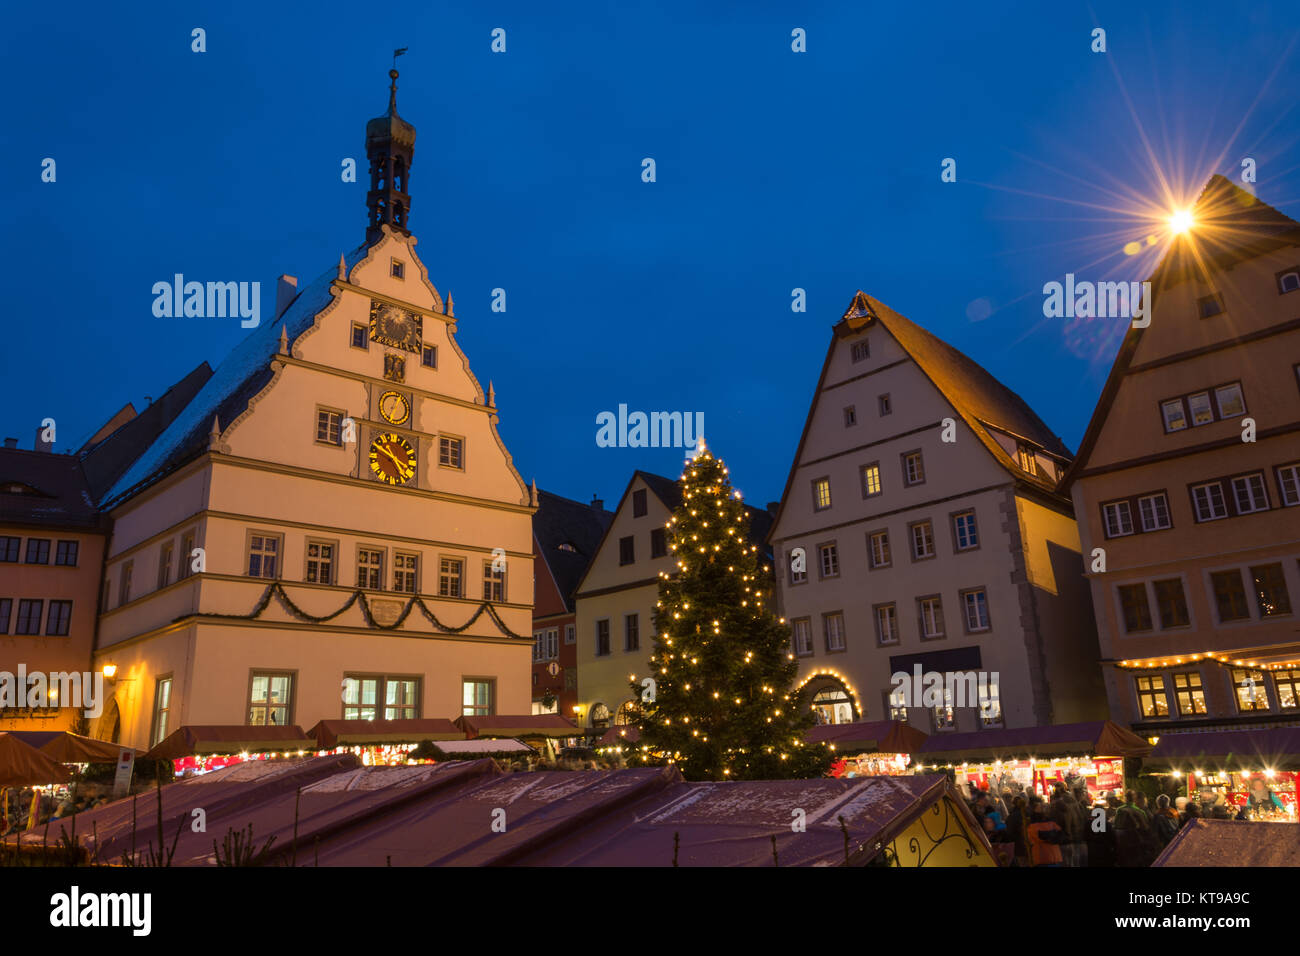 The Christmas market in Rothenburg ob der Tauber, Germany during blue hour Stock Photo